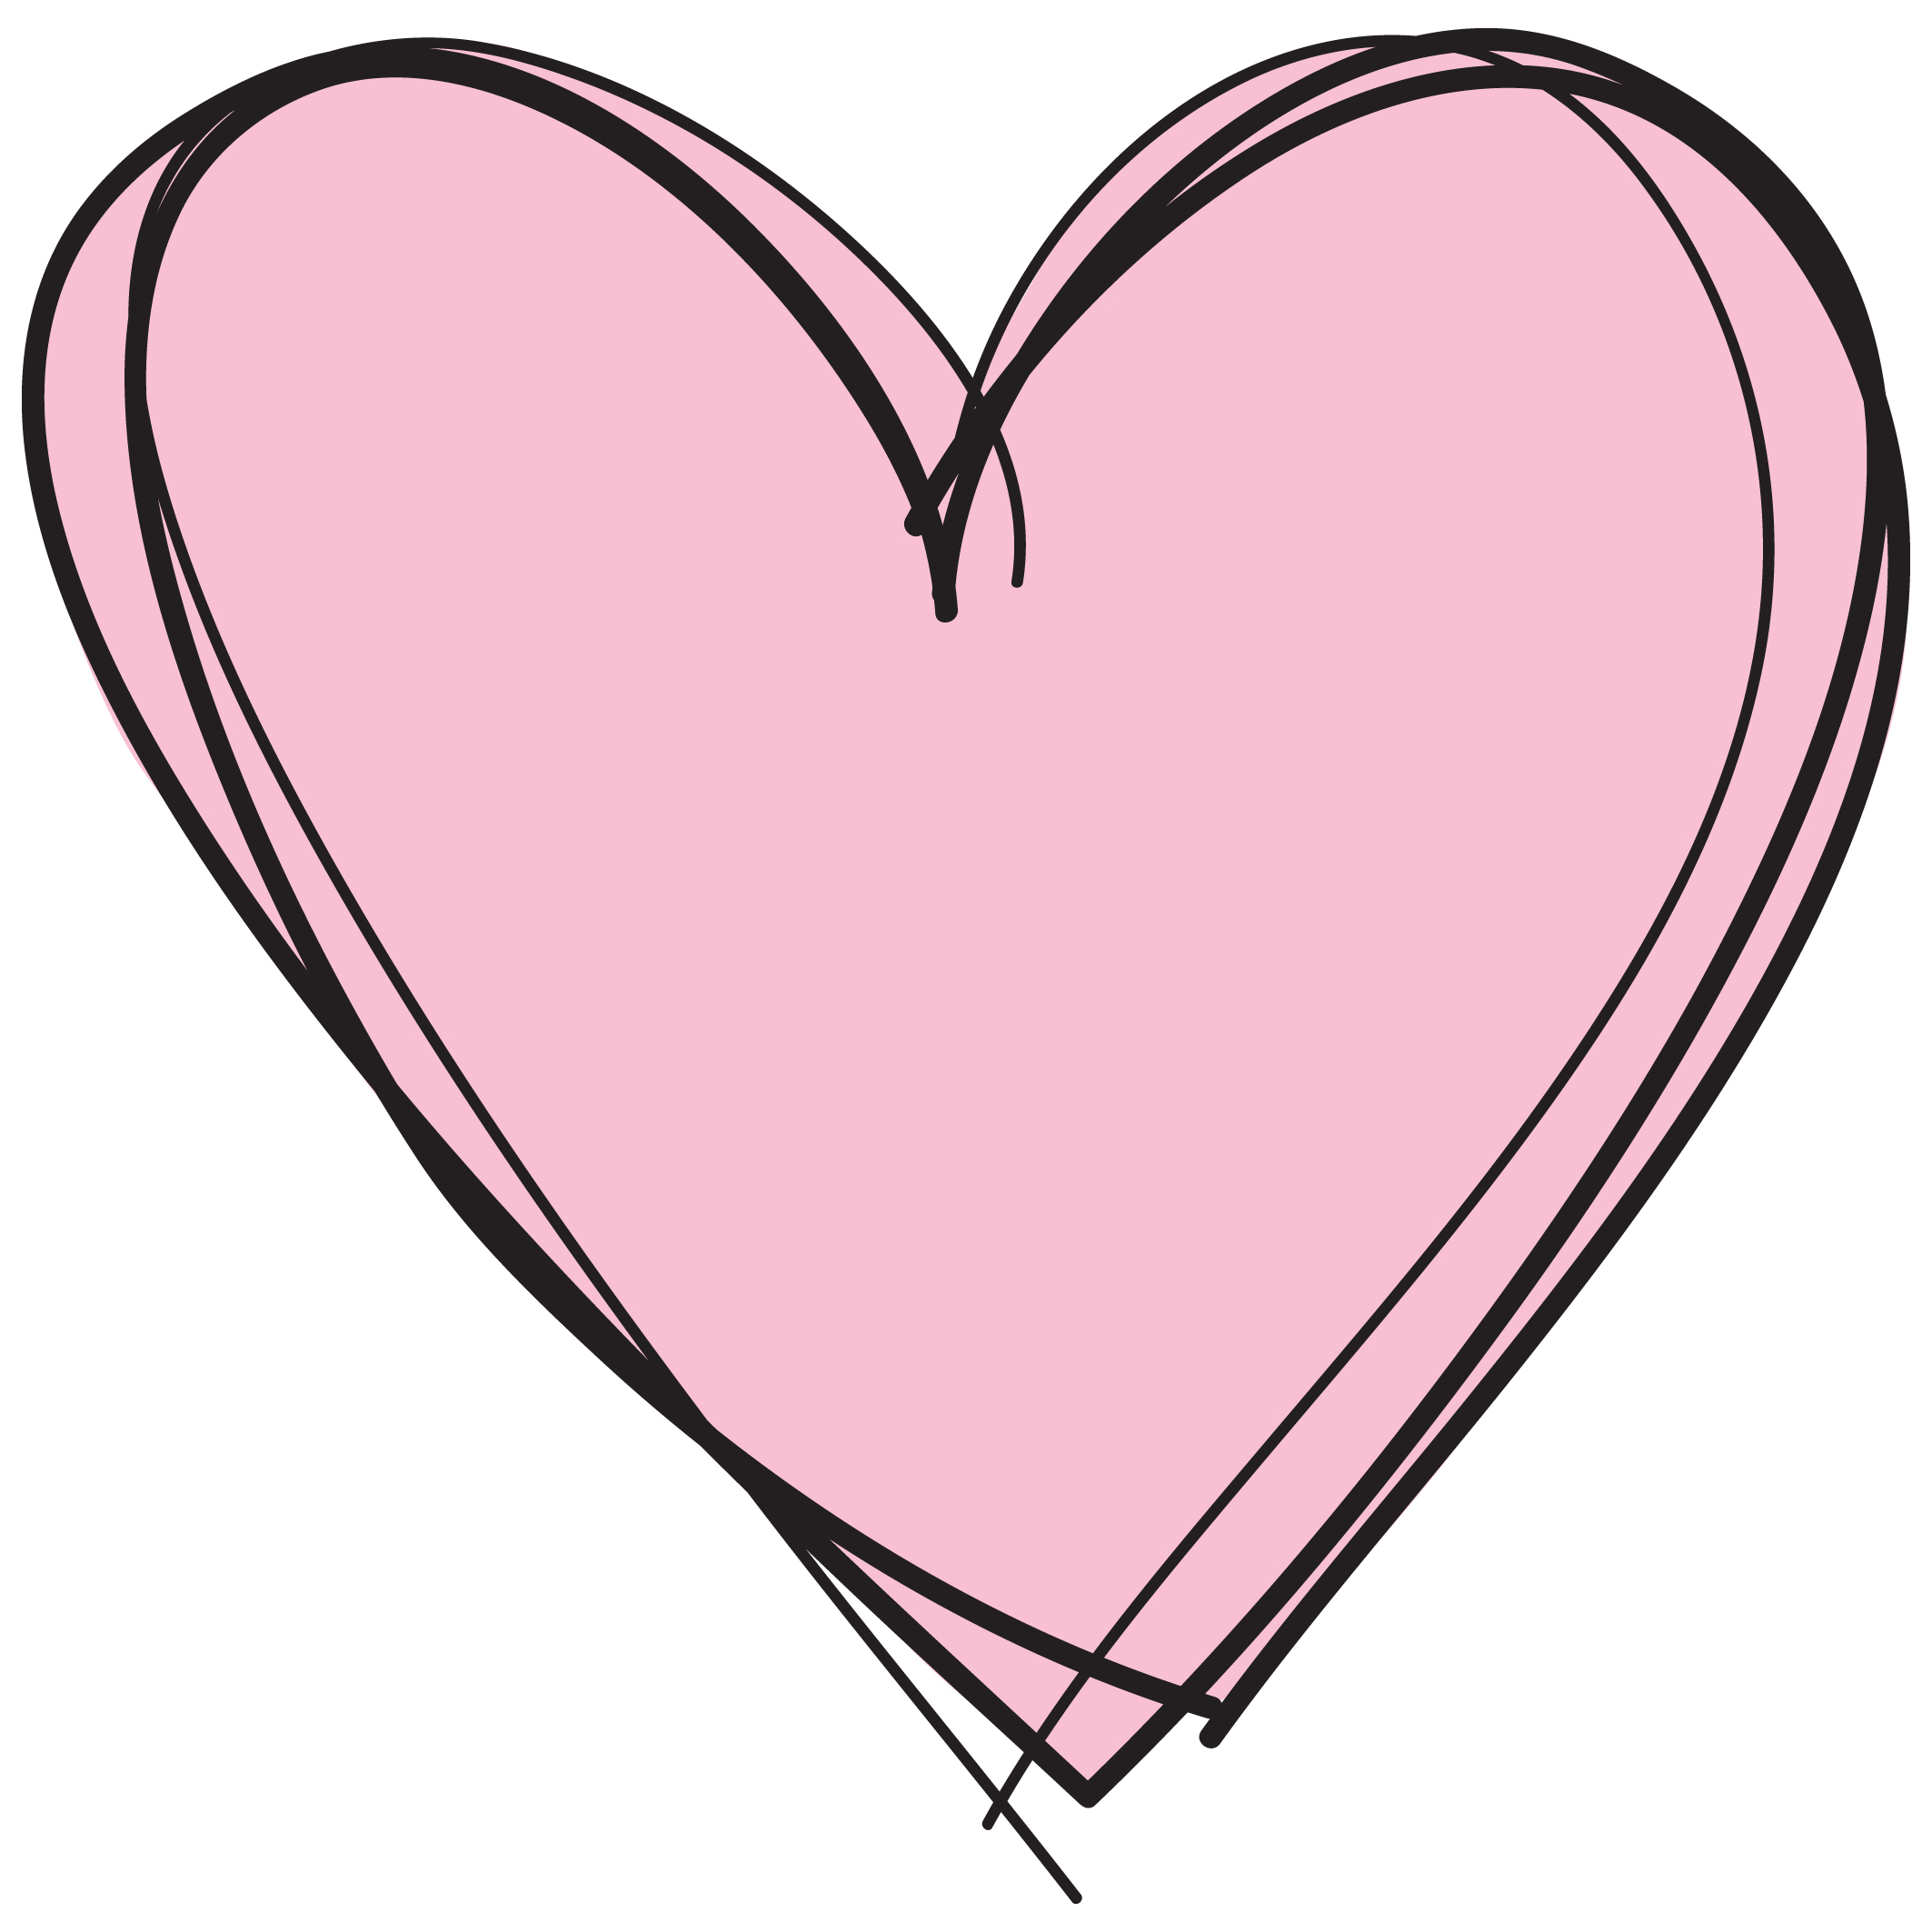 Pink Heart Images - ClipArt Best